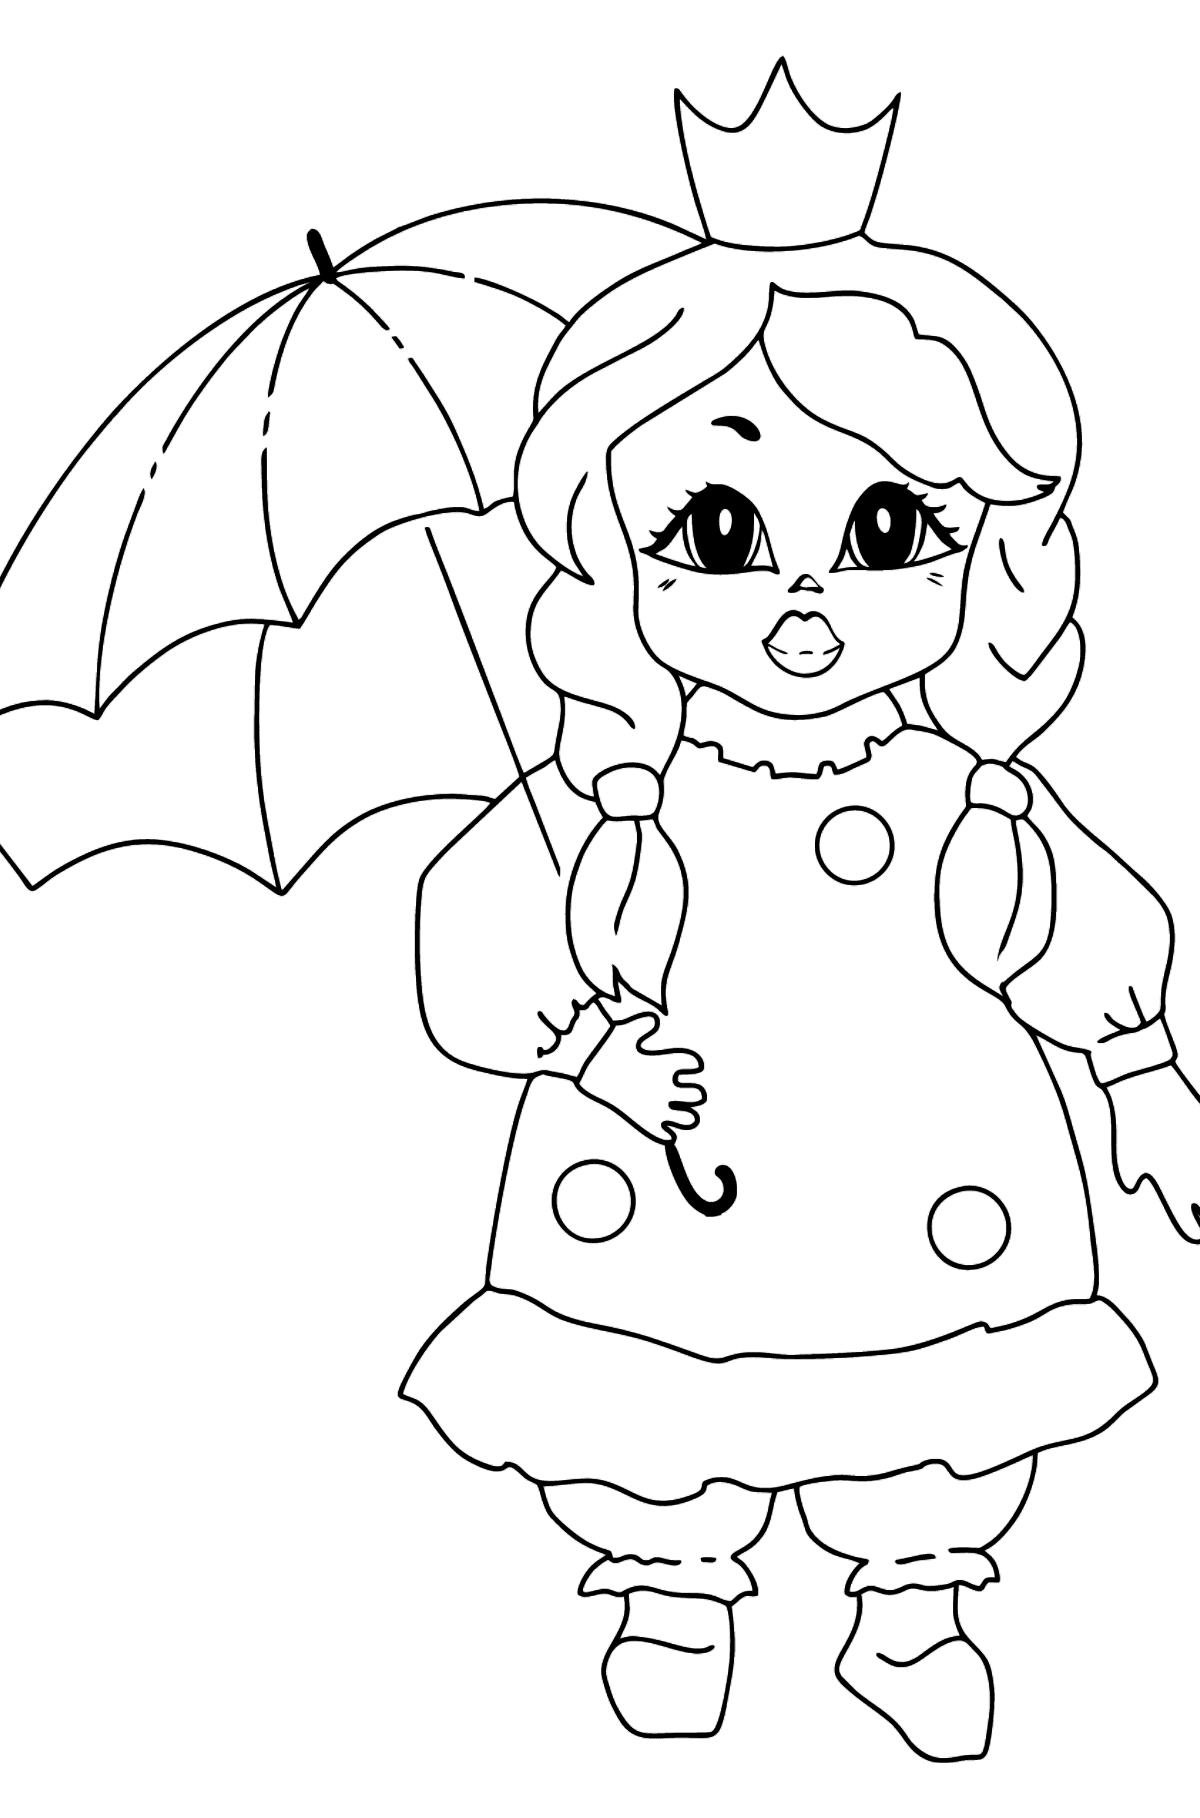 Funny princess coloring page - Coloring Pages for Kids